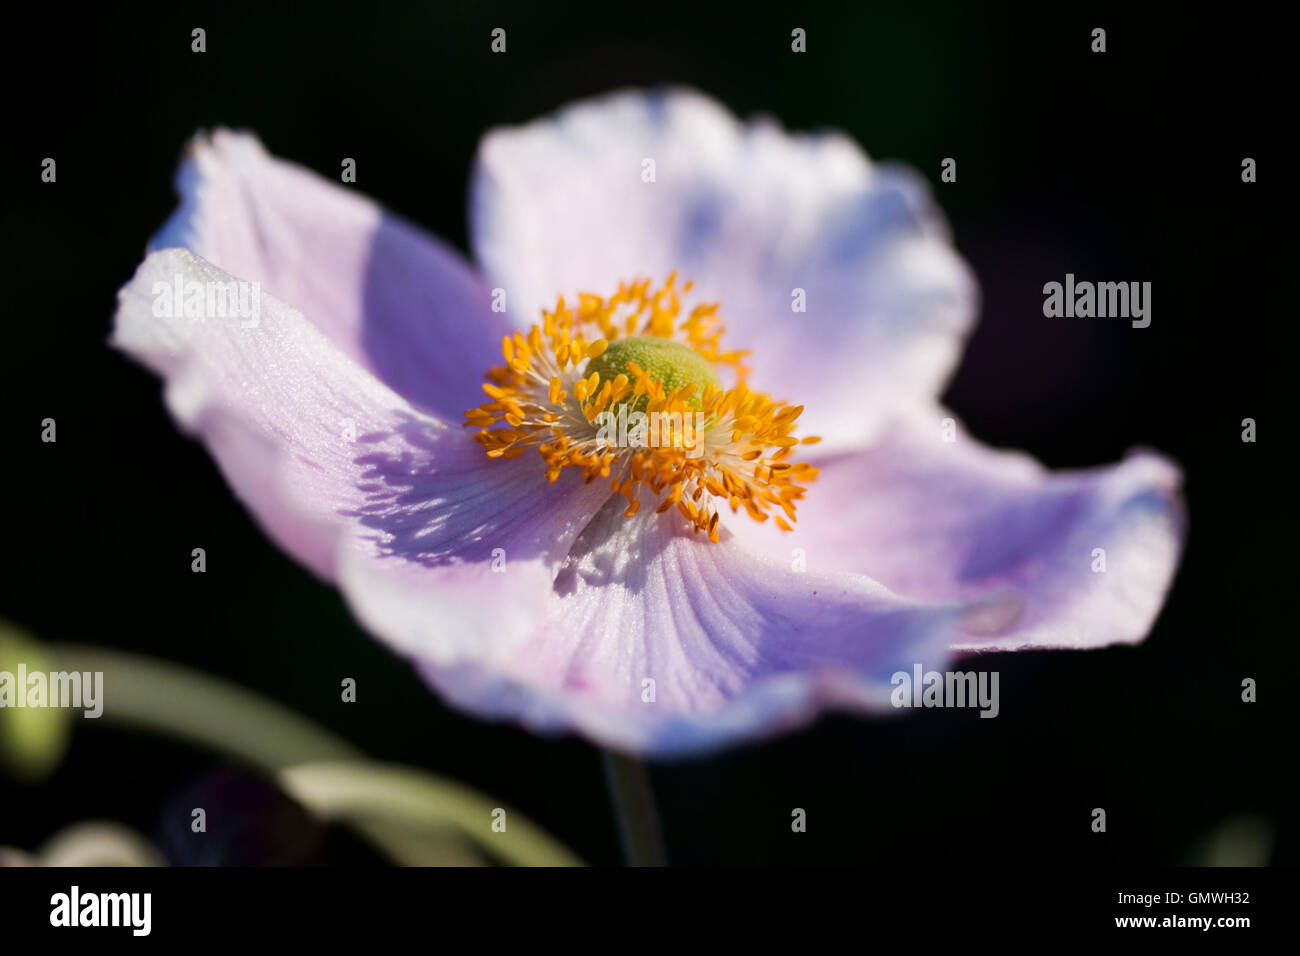 Image of a single Japanese anemone flower with dark background Stock Photo